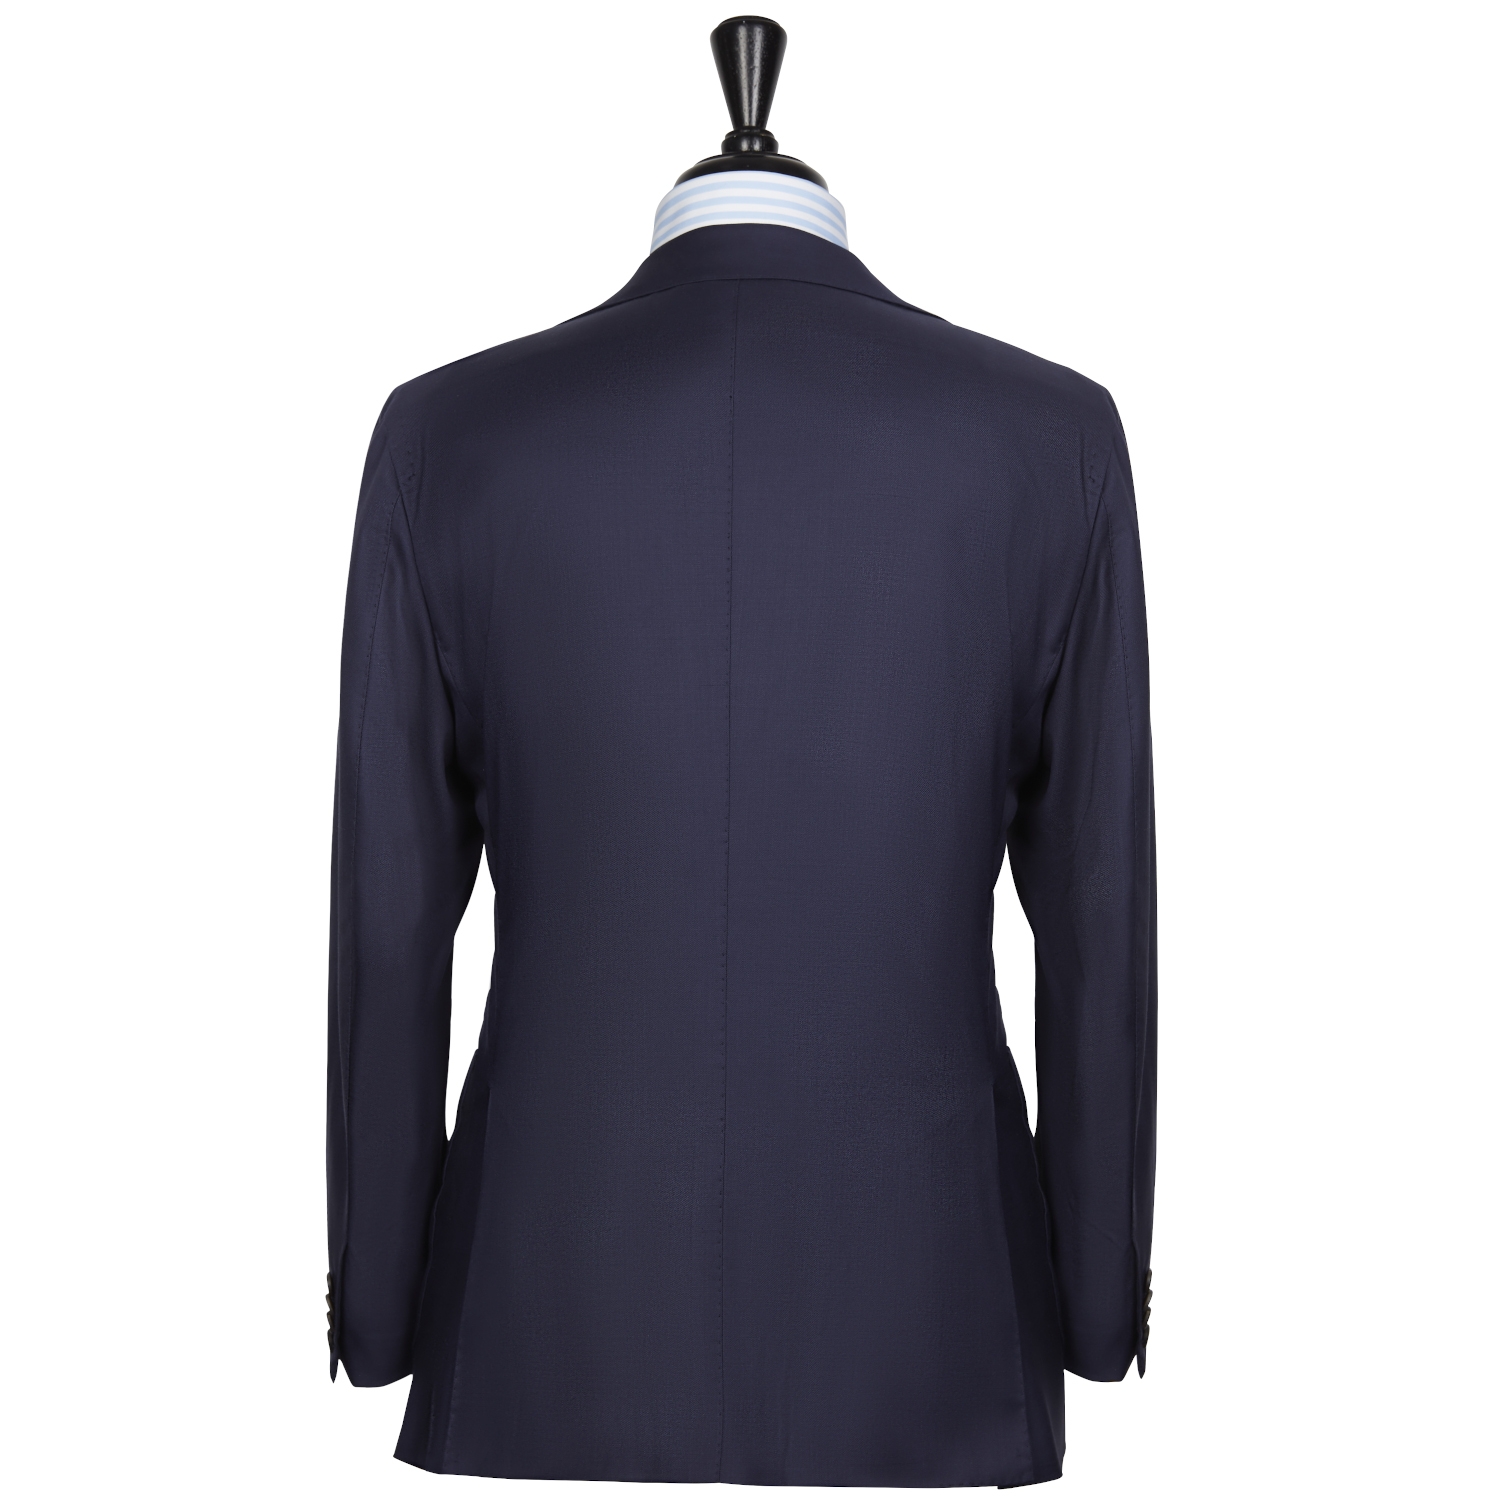 SSM15 – SOLID NAVY SINGLE BREASTED TWO PIECE NEAPOLITAN SUIT – 260 GR ...